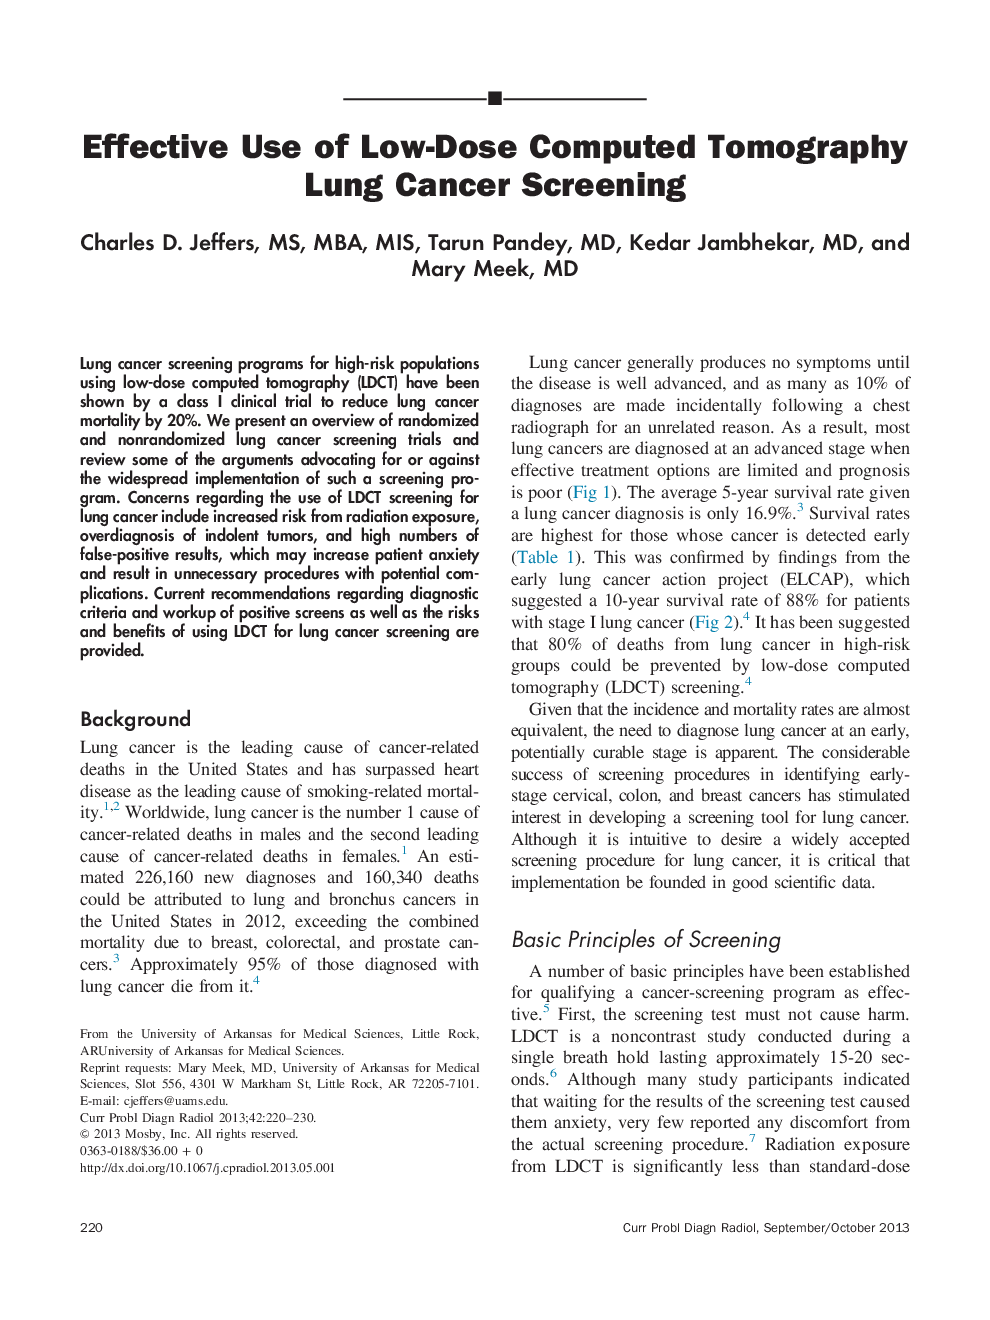 Effective Use of Low-Dose Computed Tomography Lung Cancer Screening